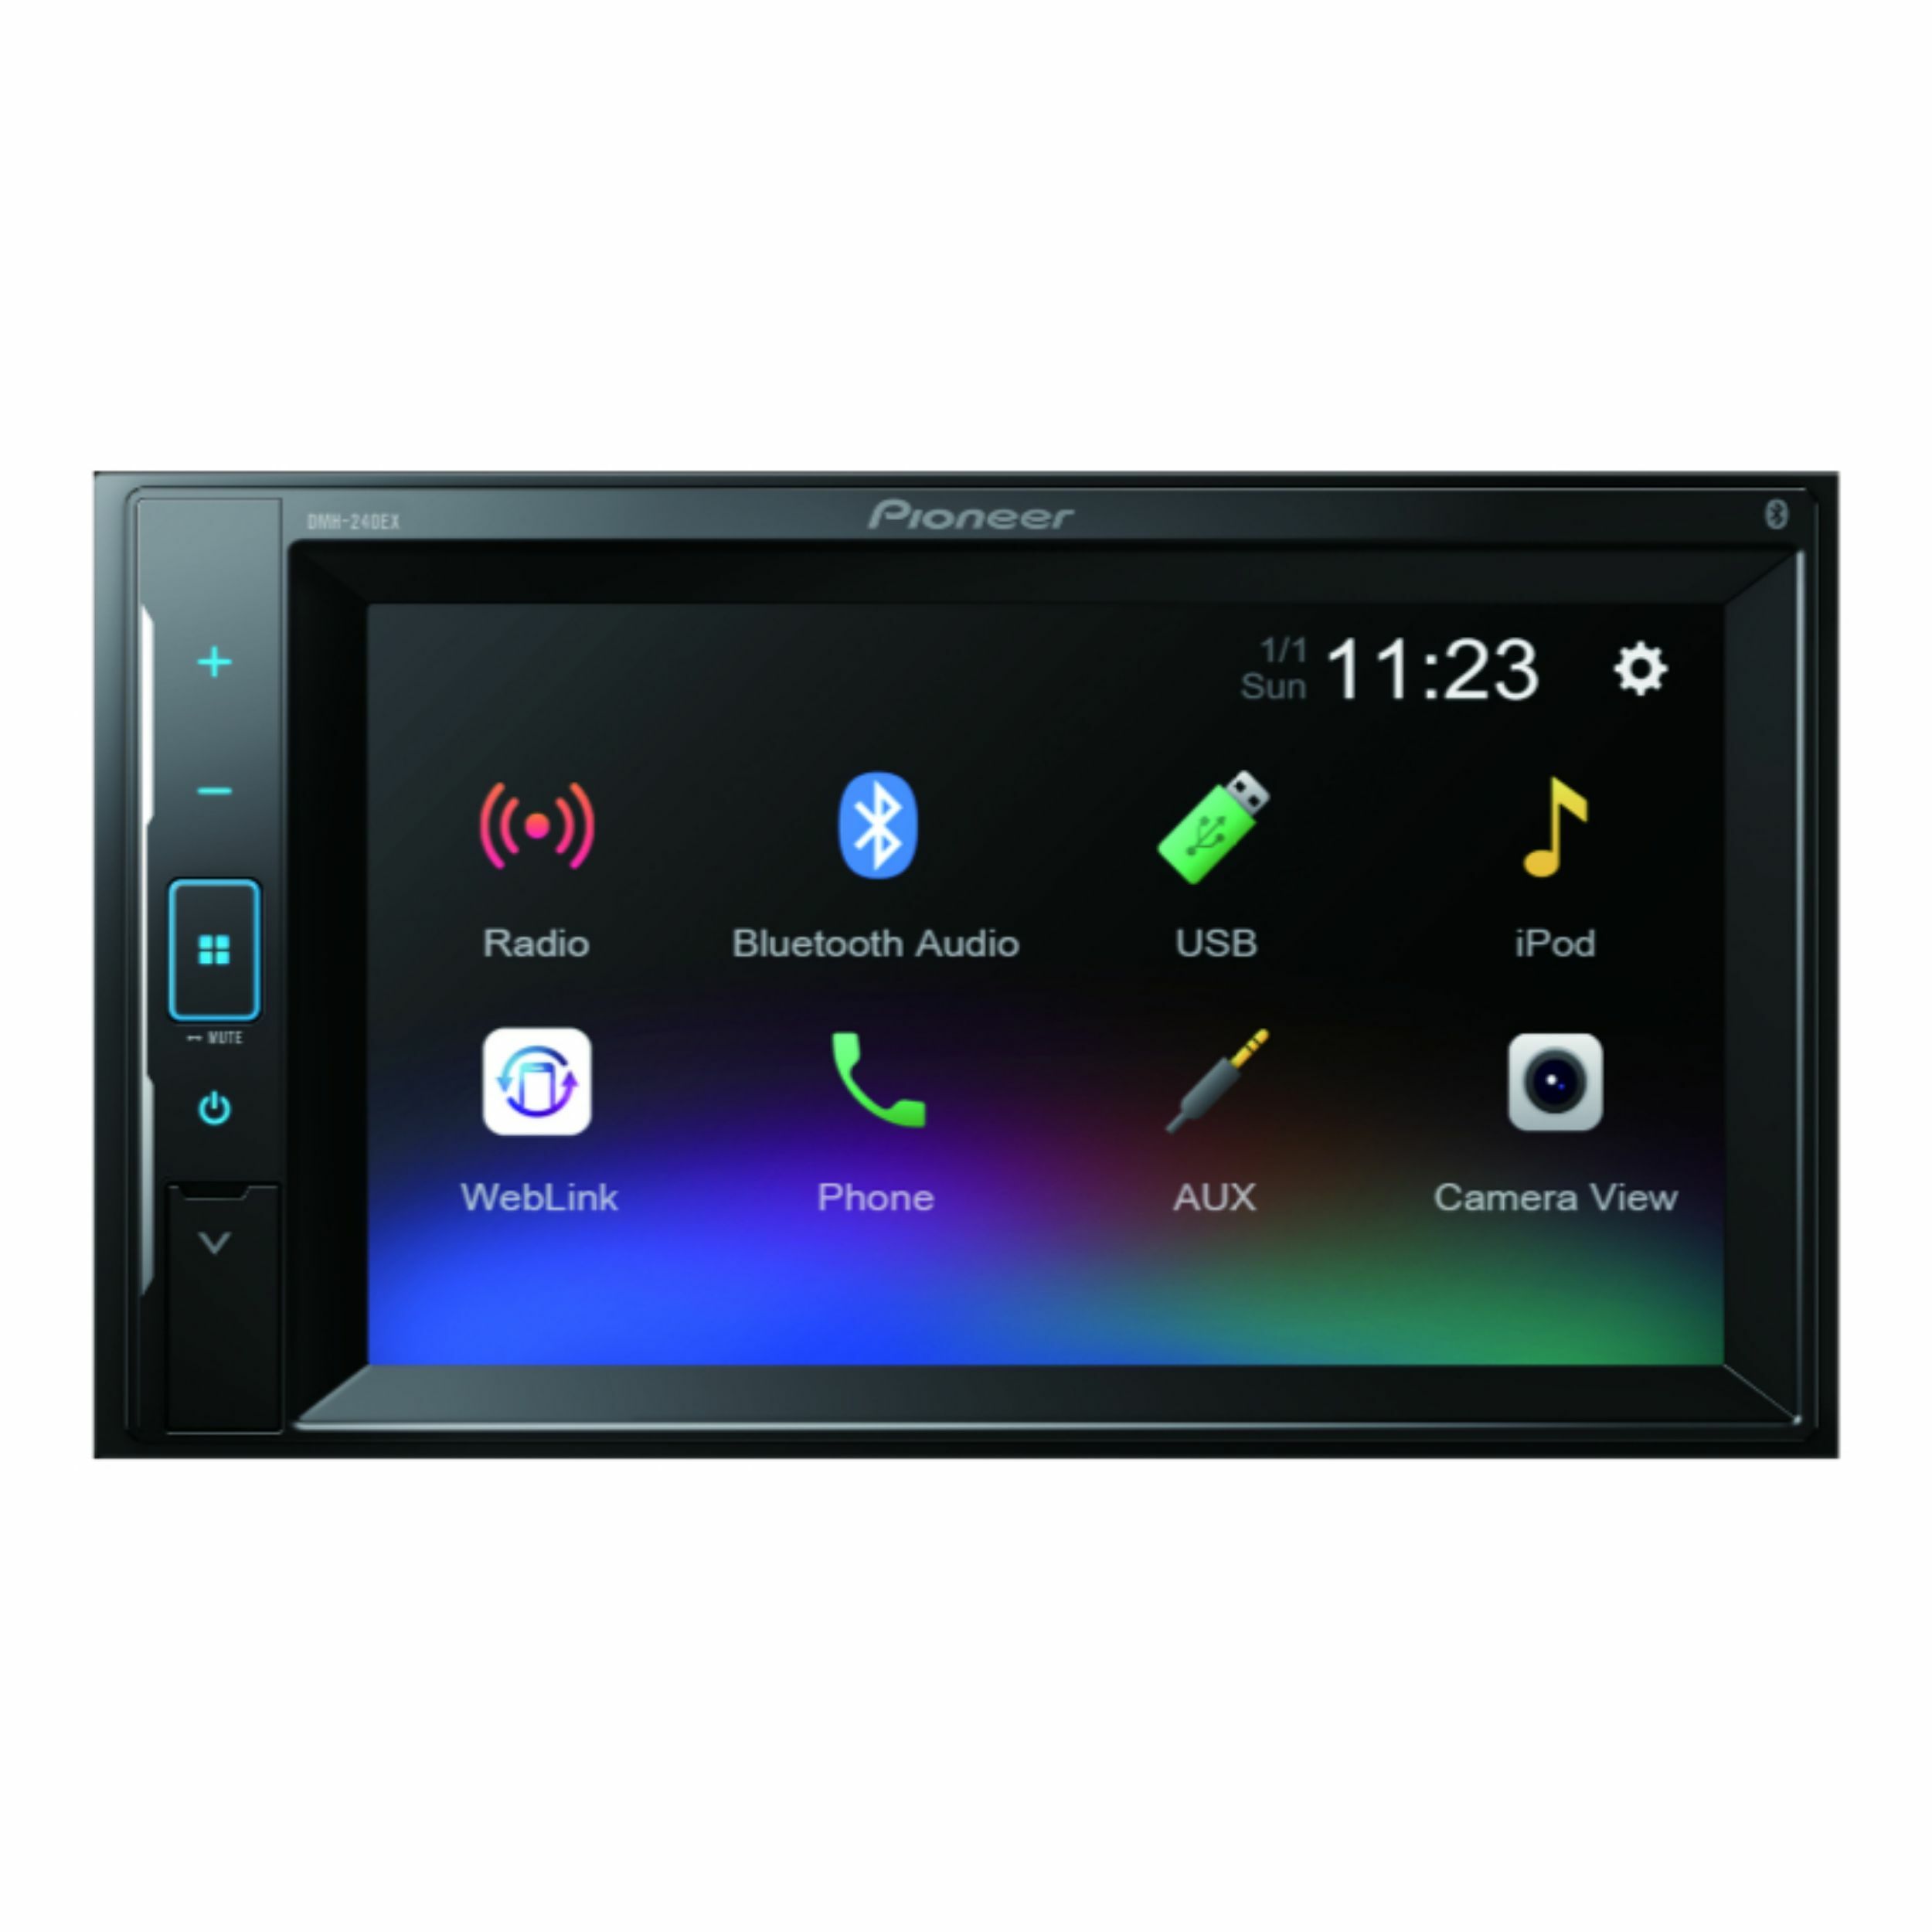 Pioneer DMH-240EX 2-DIN Bluetooth Digital Media Receiver with 6.2 - inch Touchscreen - Black - image 3 of 4